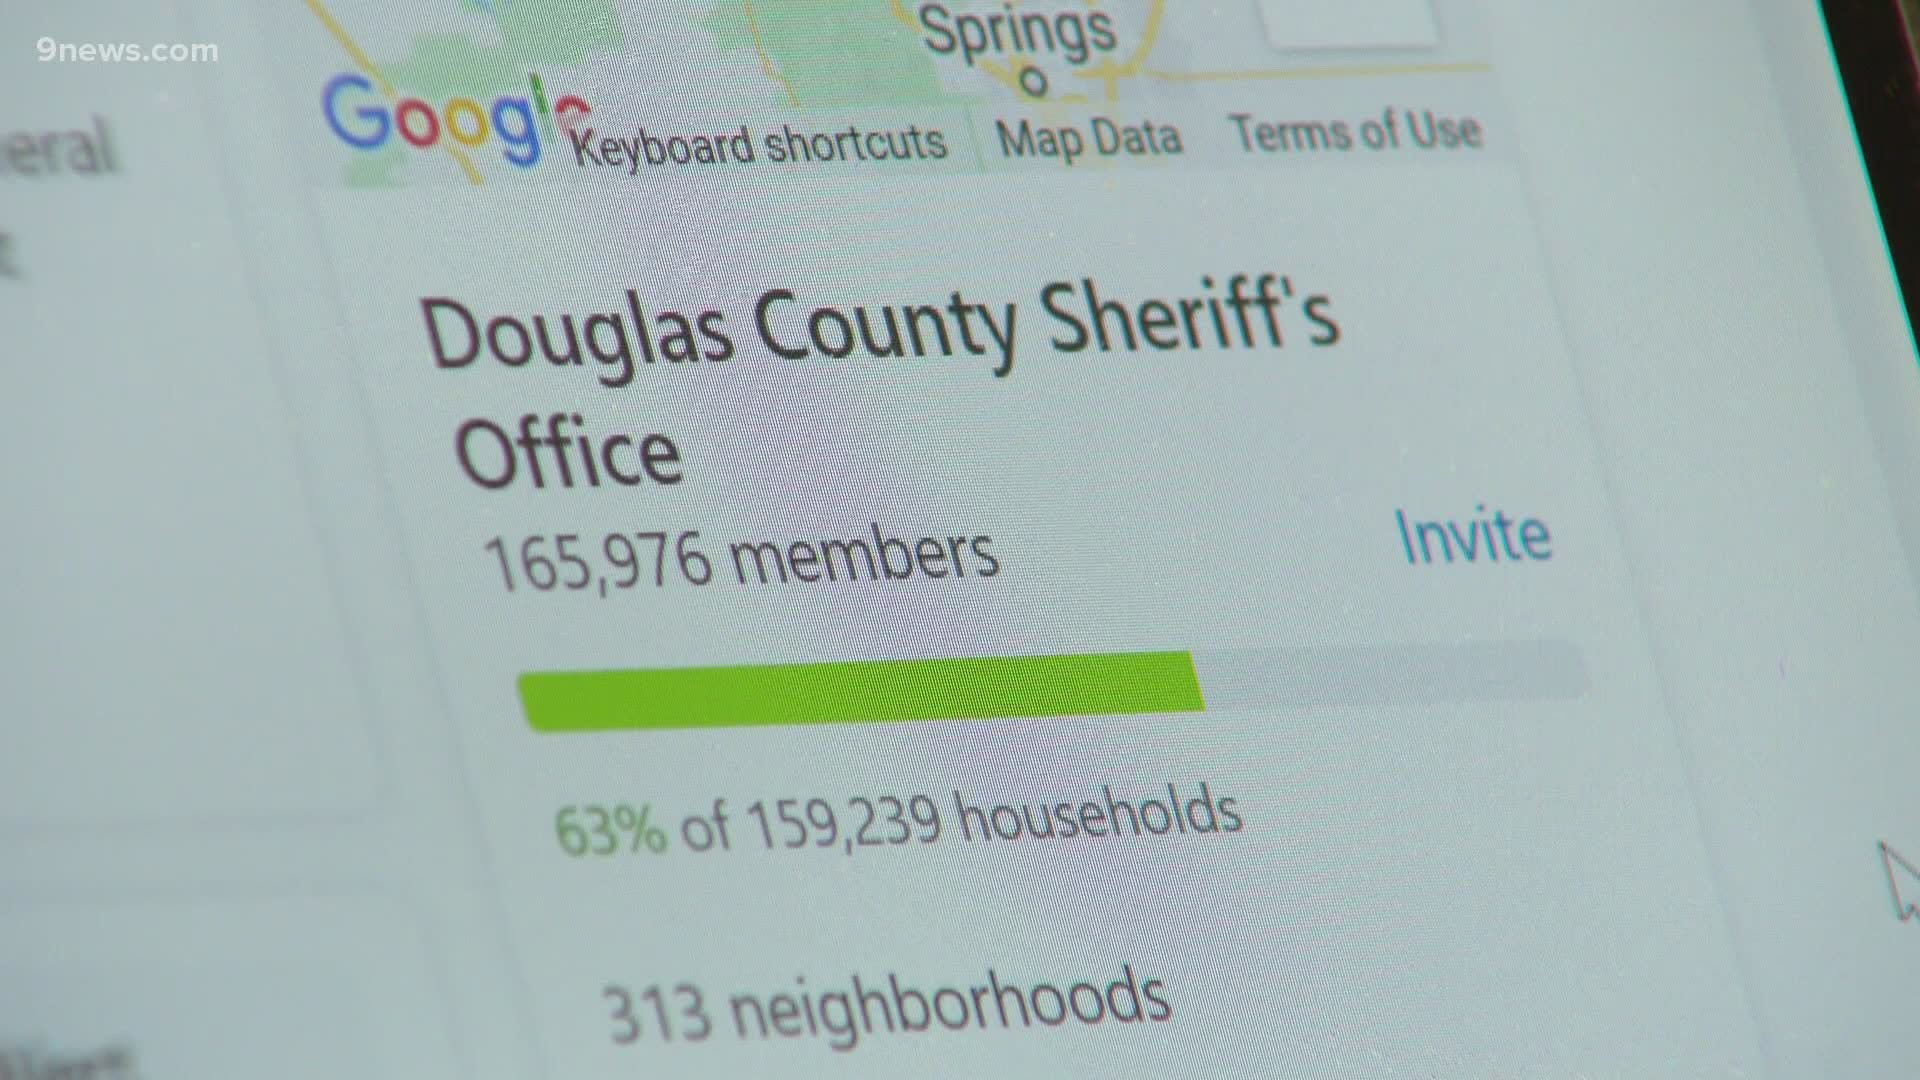 Sheriff Tony Spurlock said the software from Zencity isn't spying on people but helping his department better communicate with people in the community.